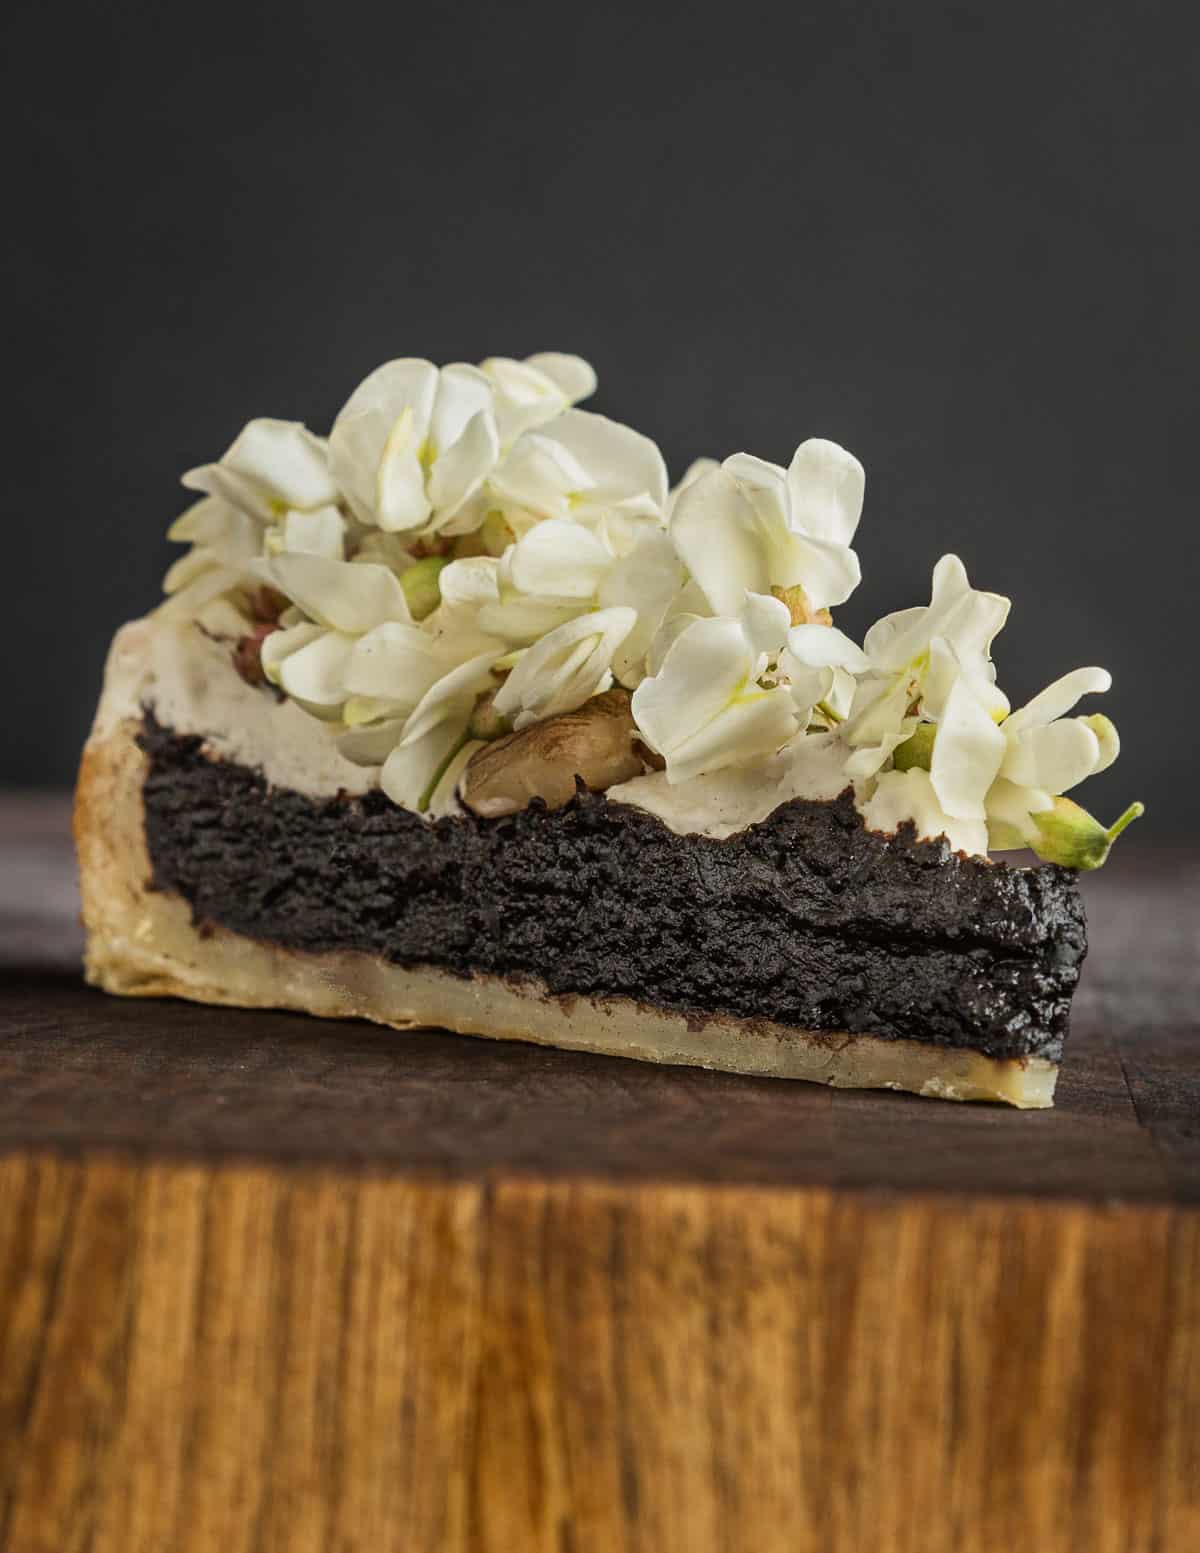 A rustic cake of nannyberry puree topped with black locust flowers. 